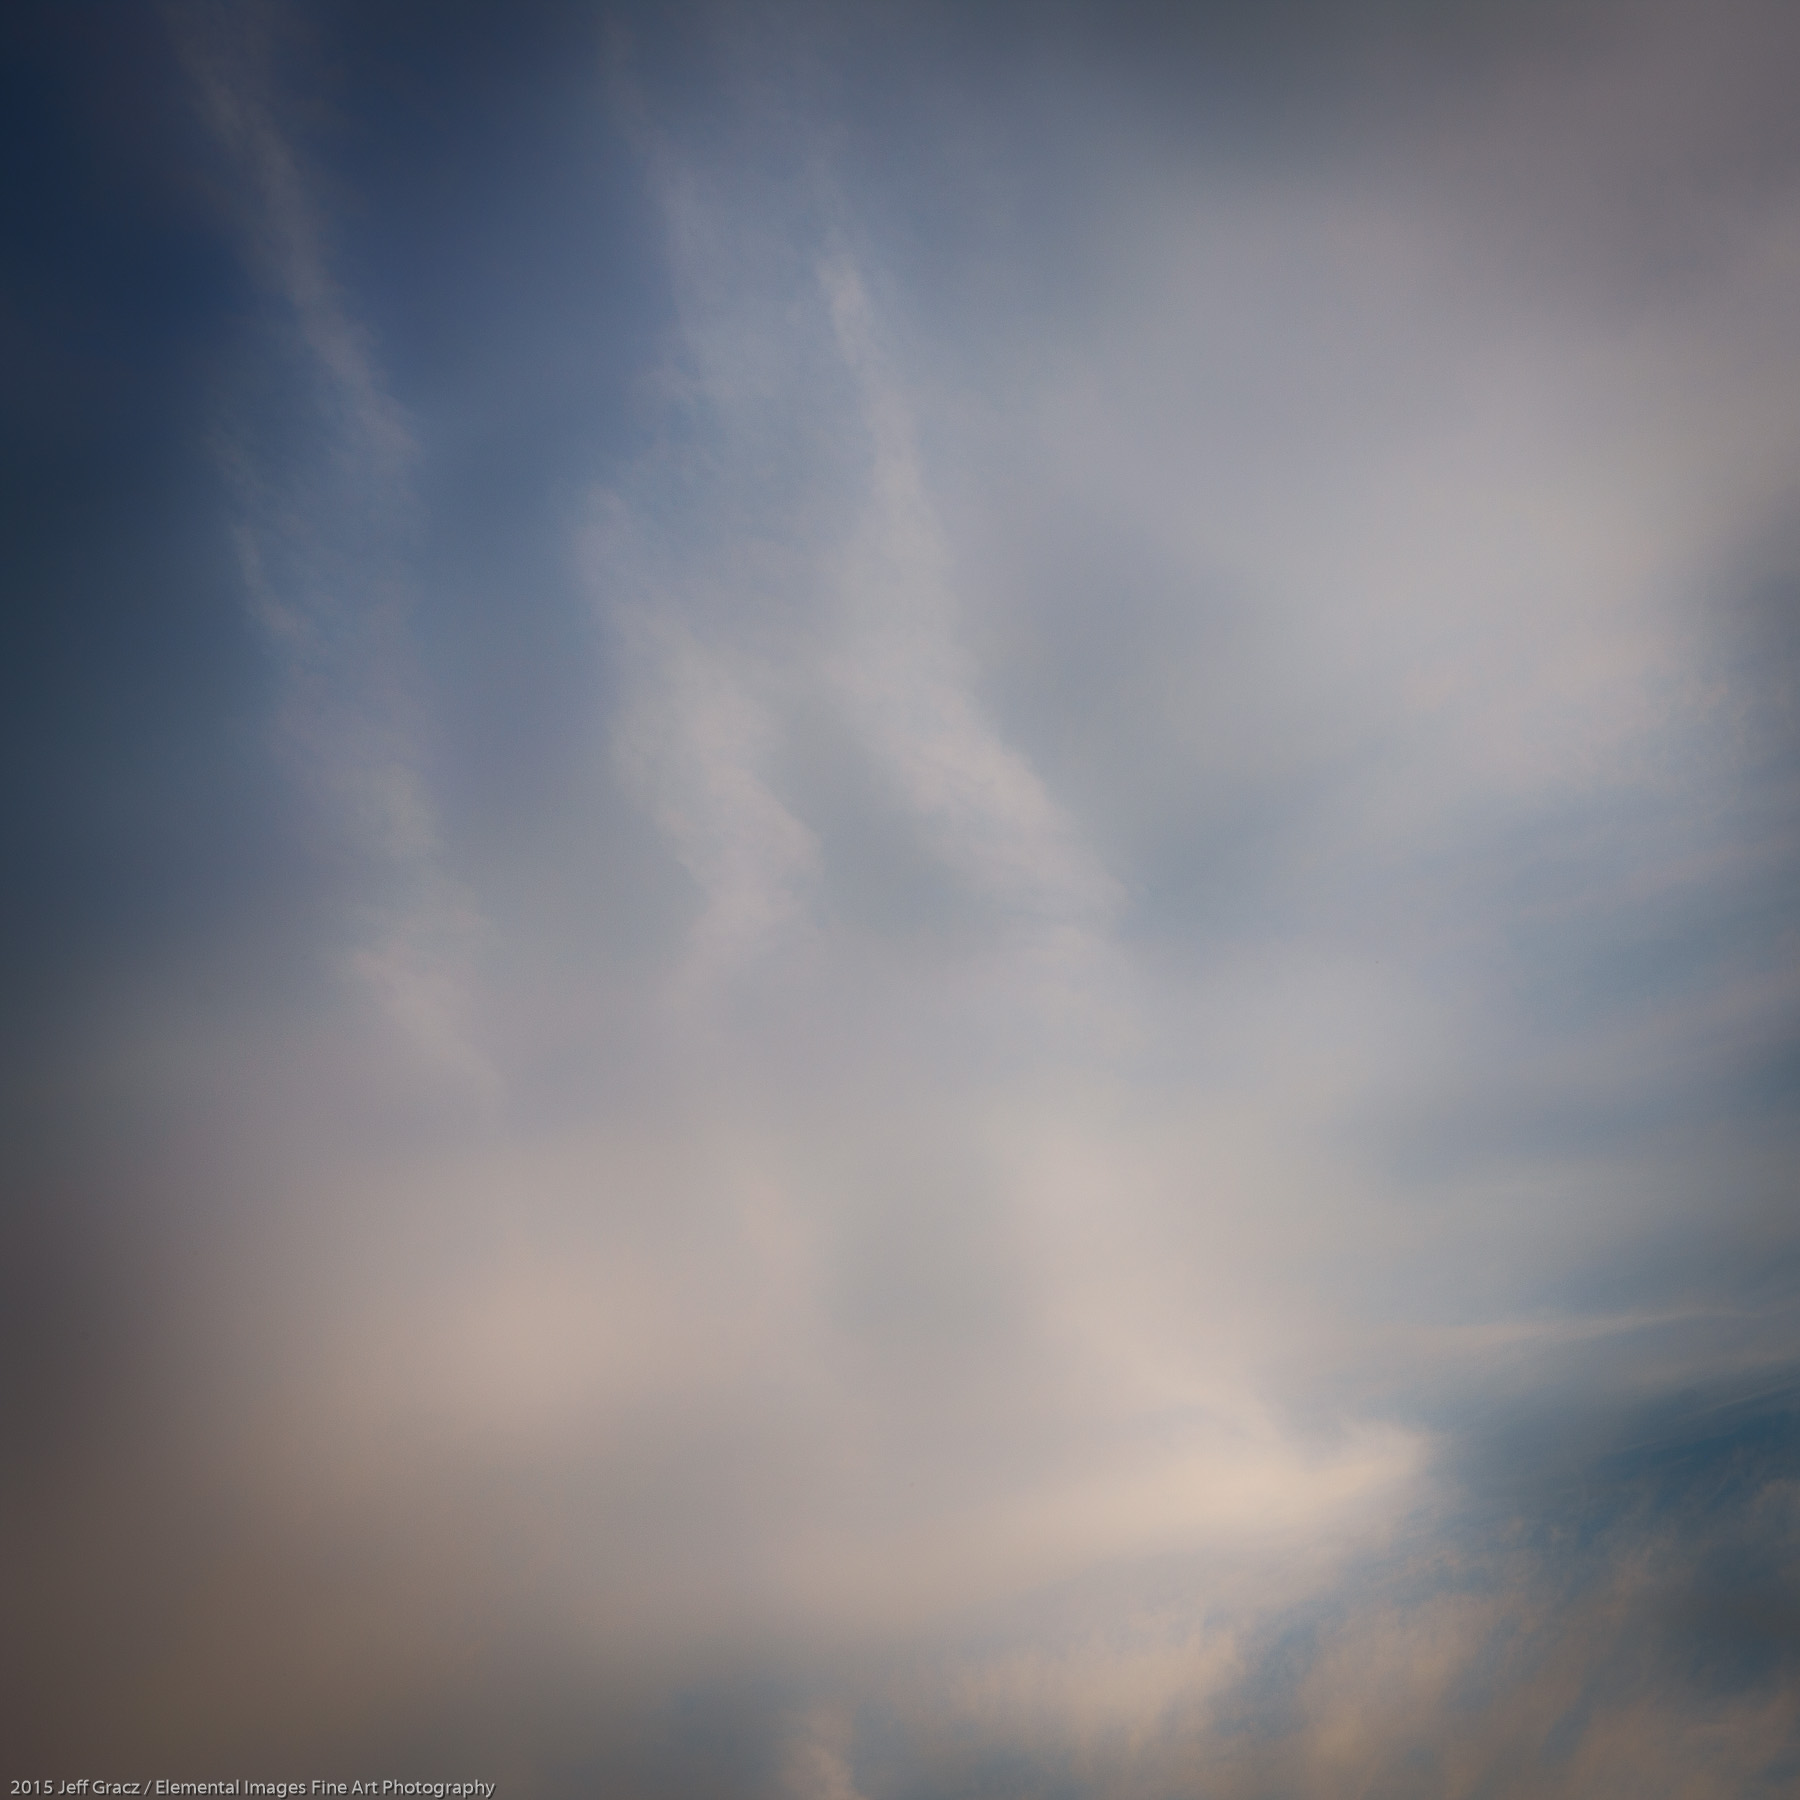 Skyscapes #5 | Vancouver | WA | USA - © 2015 Jeff Gracz / Elemental Images Fine Art Photography - All Rights Reserved Worldwide